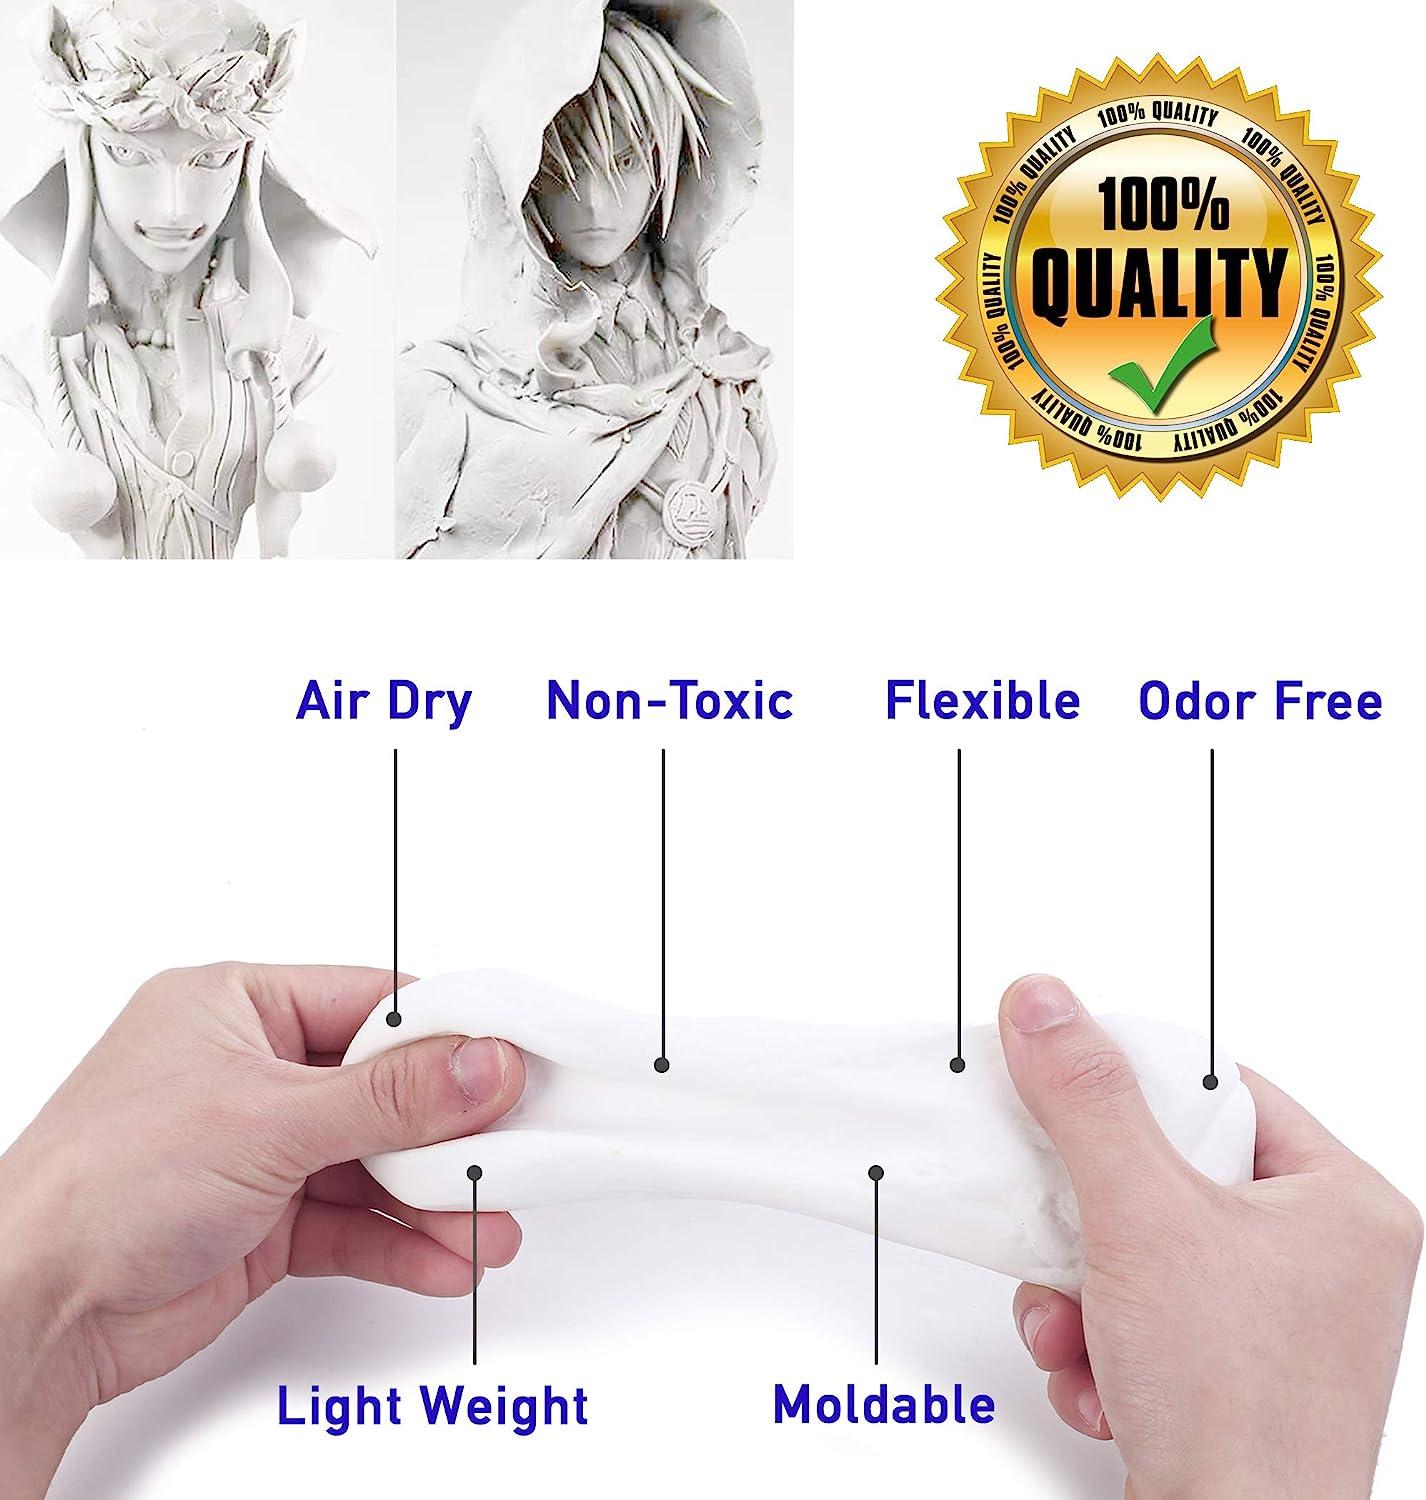 3.3 lbs Moldable Cosplay Foam Clay (White) – High Density and Hiqh Quality  for Intricate Designs | Air Dries to Perfection for Cutting with a Knife or